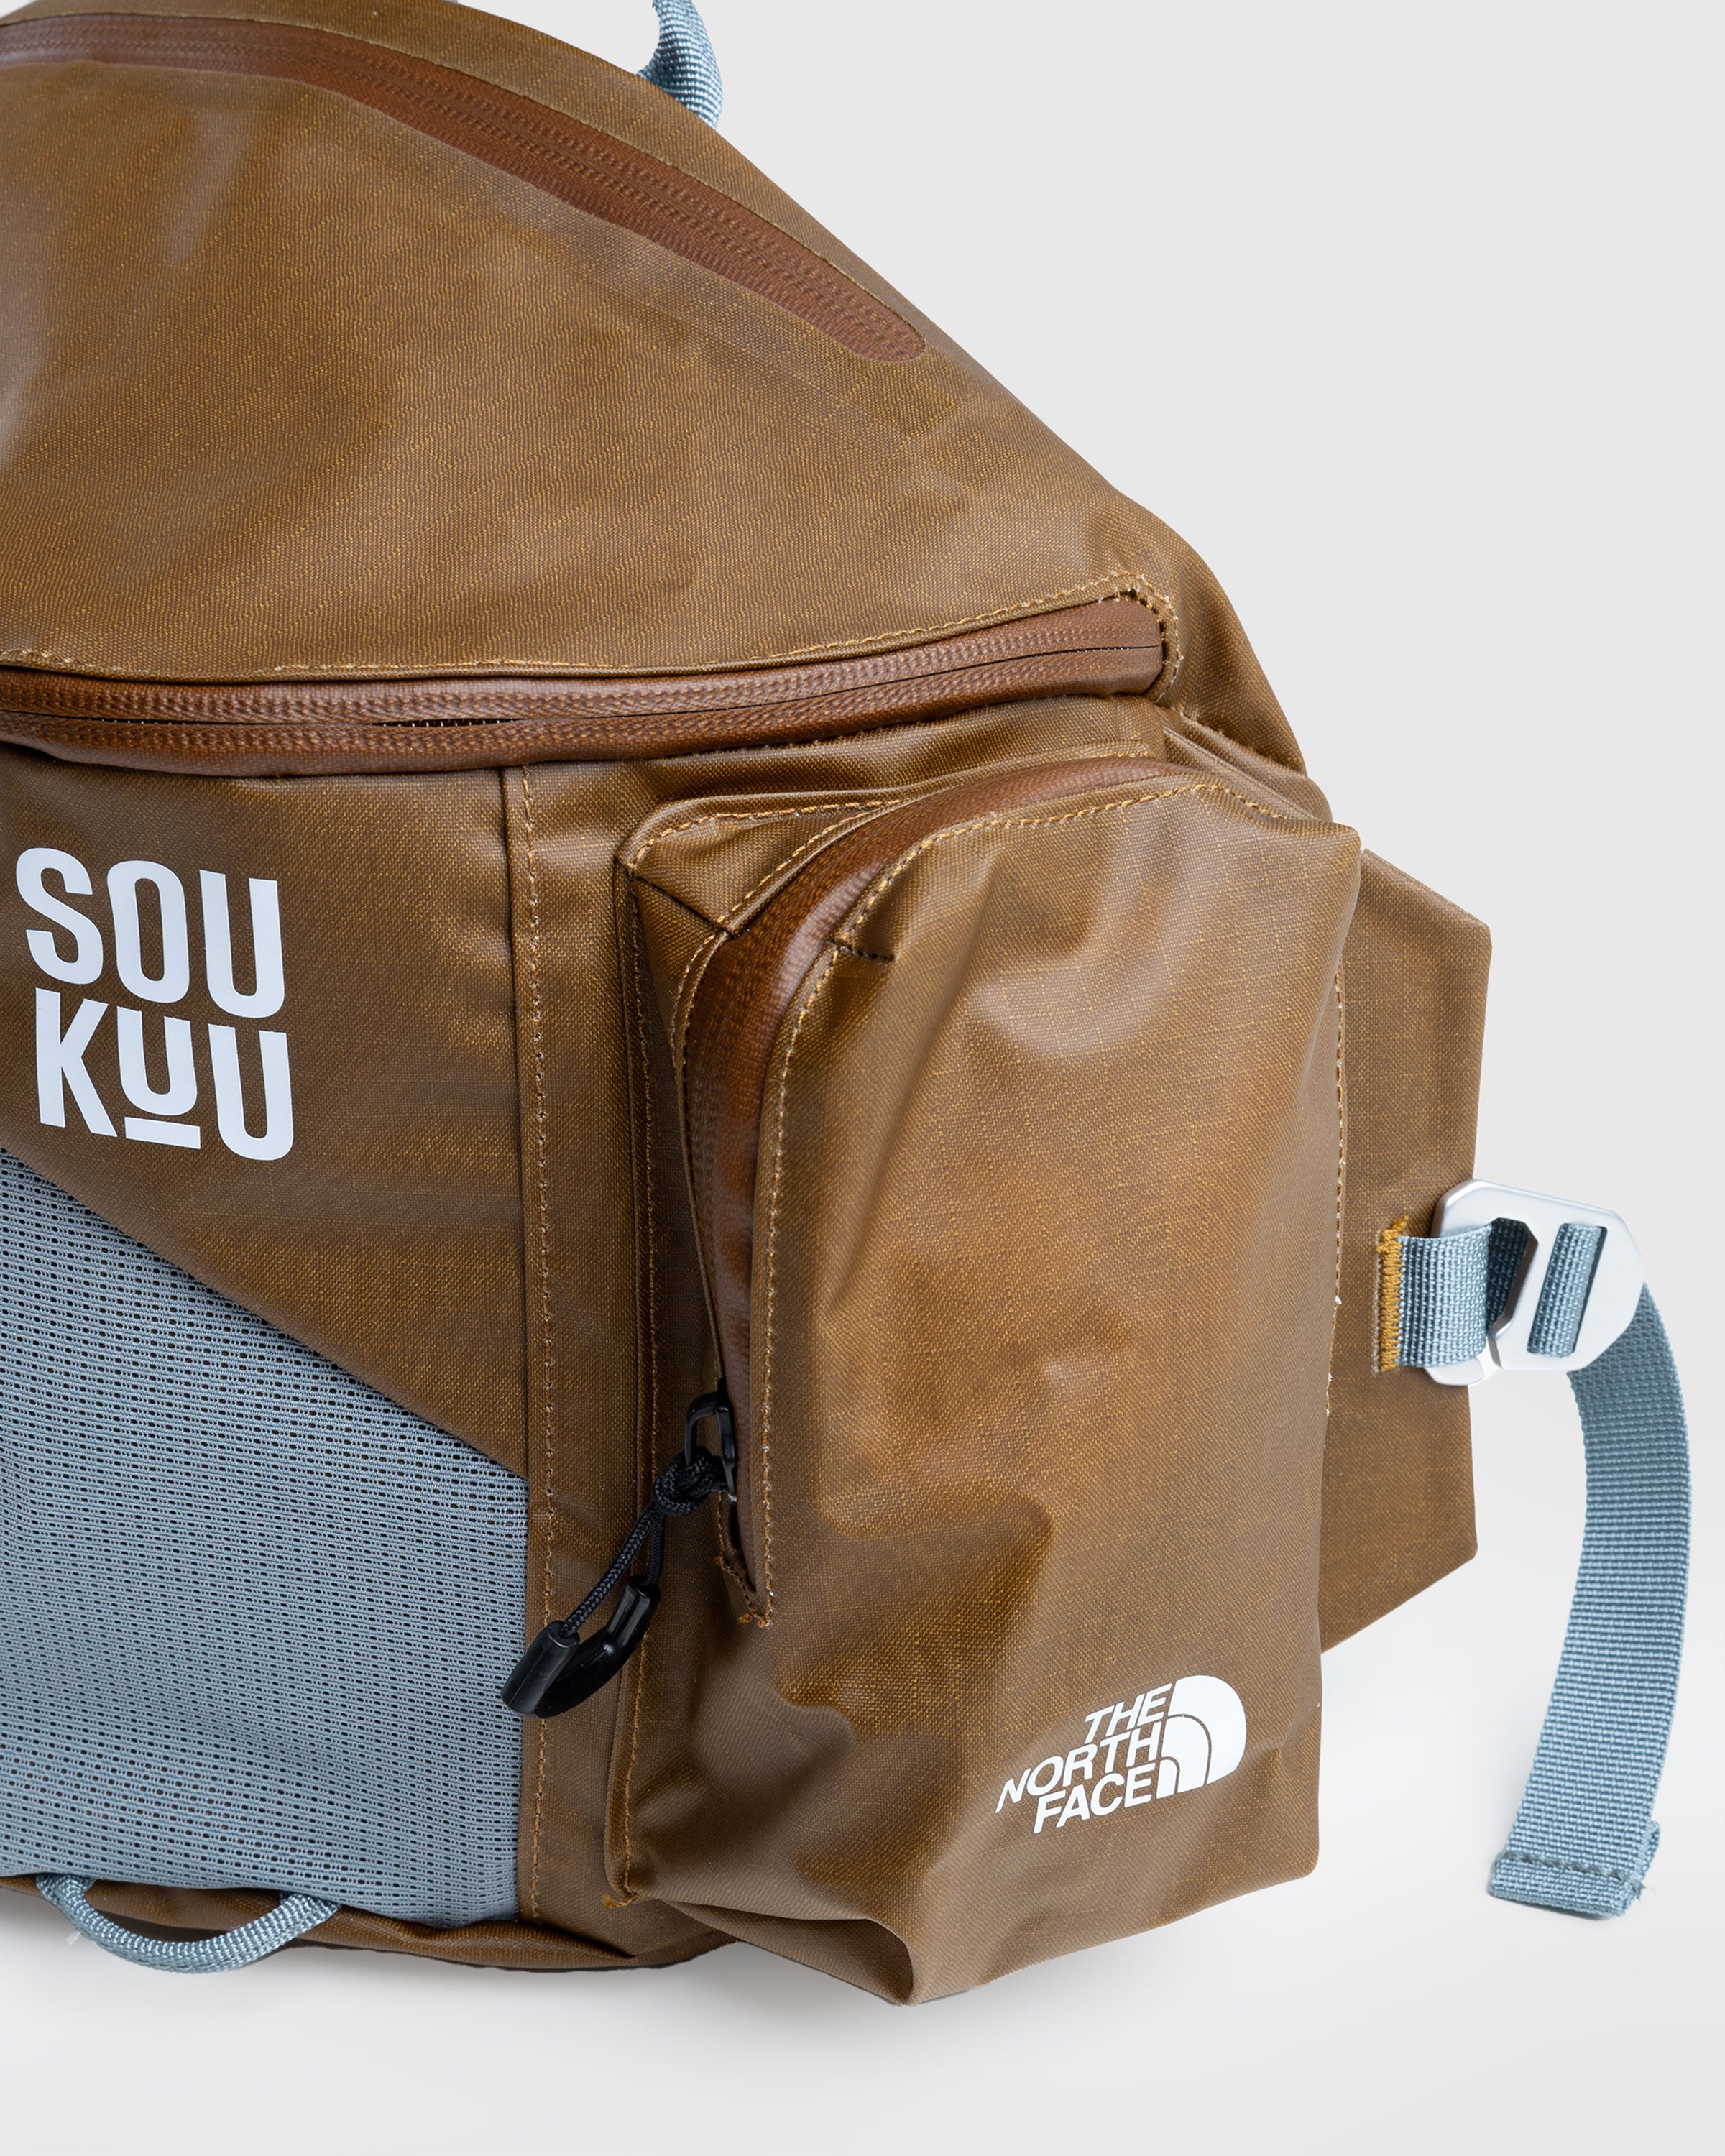 The North Face x UNDERCOVER - Soukuu Waistpack Bronze Brown/Concrete Gray - Accessories - Multi - Image 5